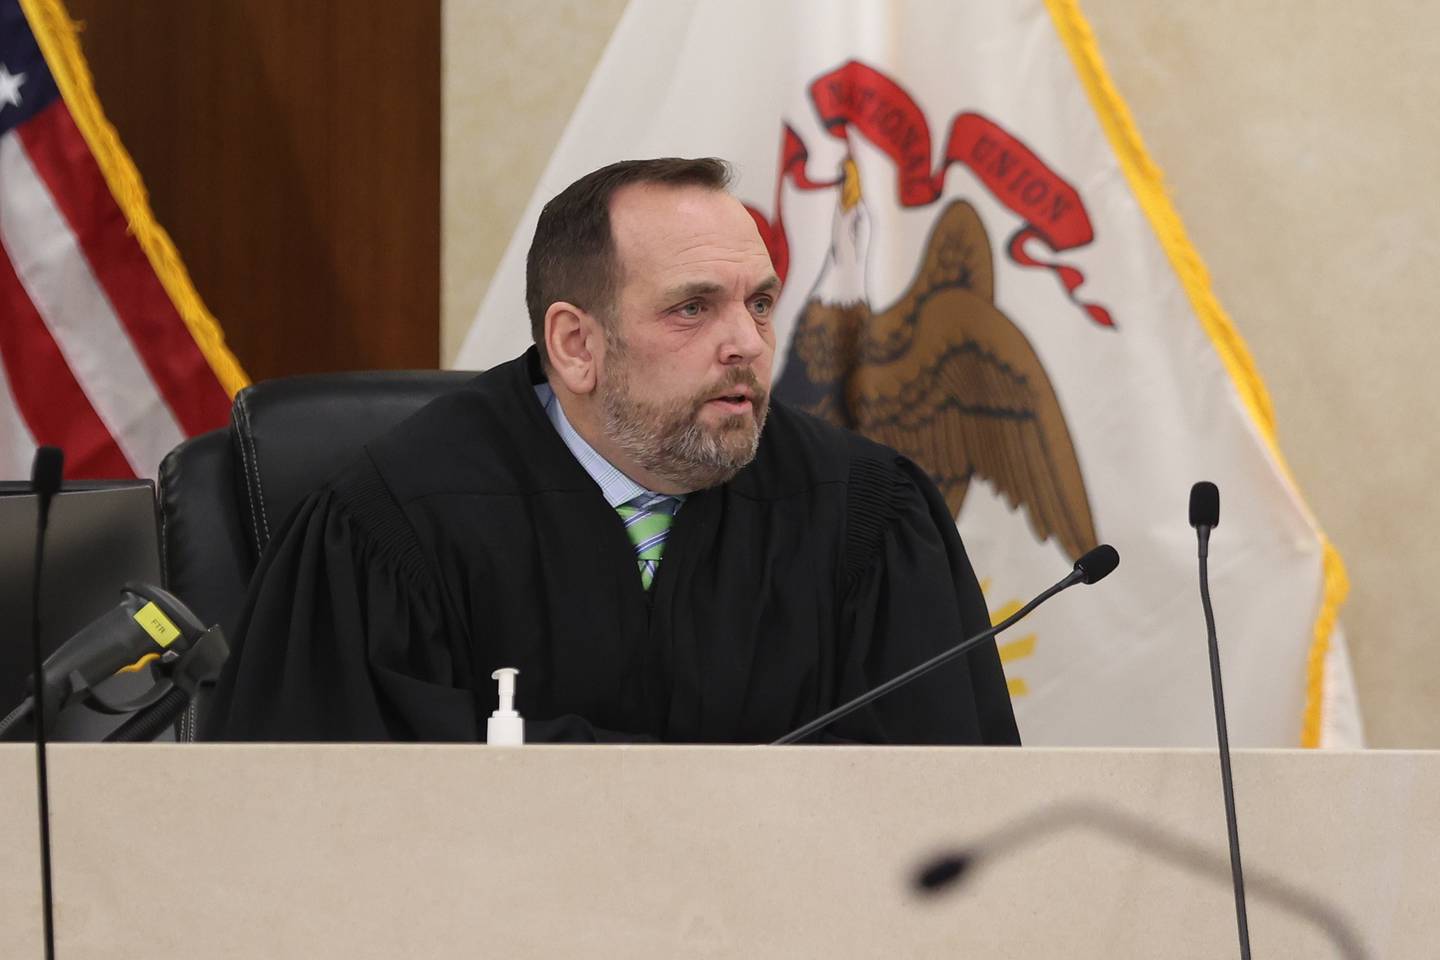 Judge Dan Rippy talks to the jury during closing arguments on Monday in the case against Sean Woulfe at the Will County Courthouse.  Sean Woulfe, 29, is charged with reckless homicide of Lindsey Schmidt, 29, and her three sons, Owen, 6, Weston, 4, and Kaleb, 1. Monday, Mar.  28, 2022, in Joliet.